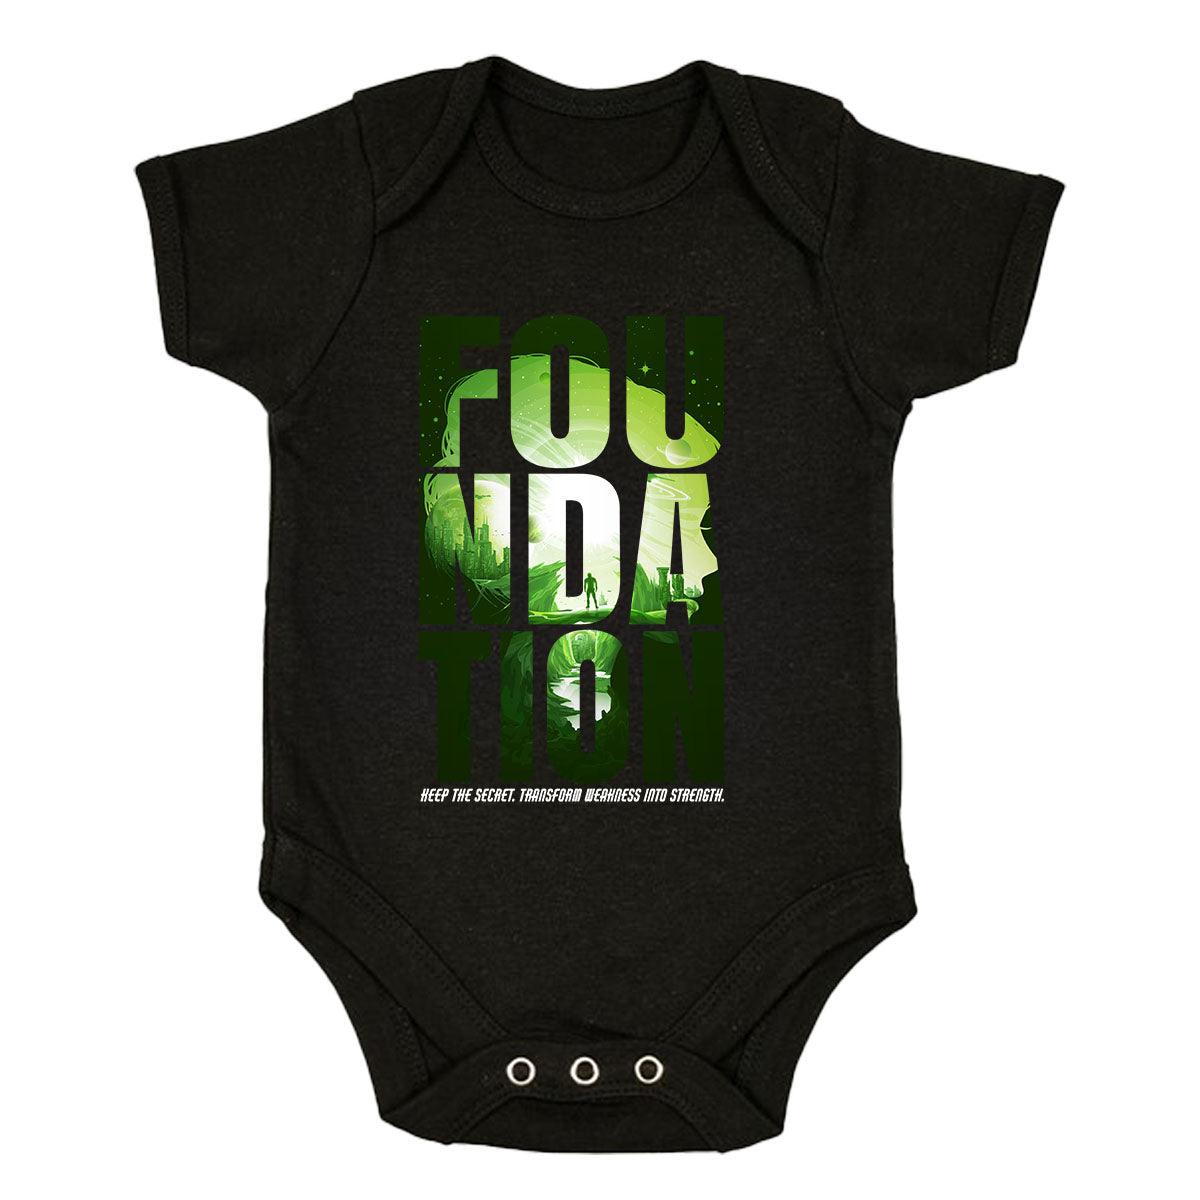 Isaac Asimov T-Shirt Foundation Empire Robot Android Science Fiction Baby & Toddler Body Suit - Kuzi Tees